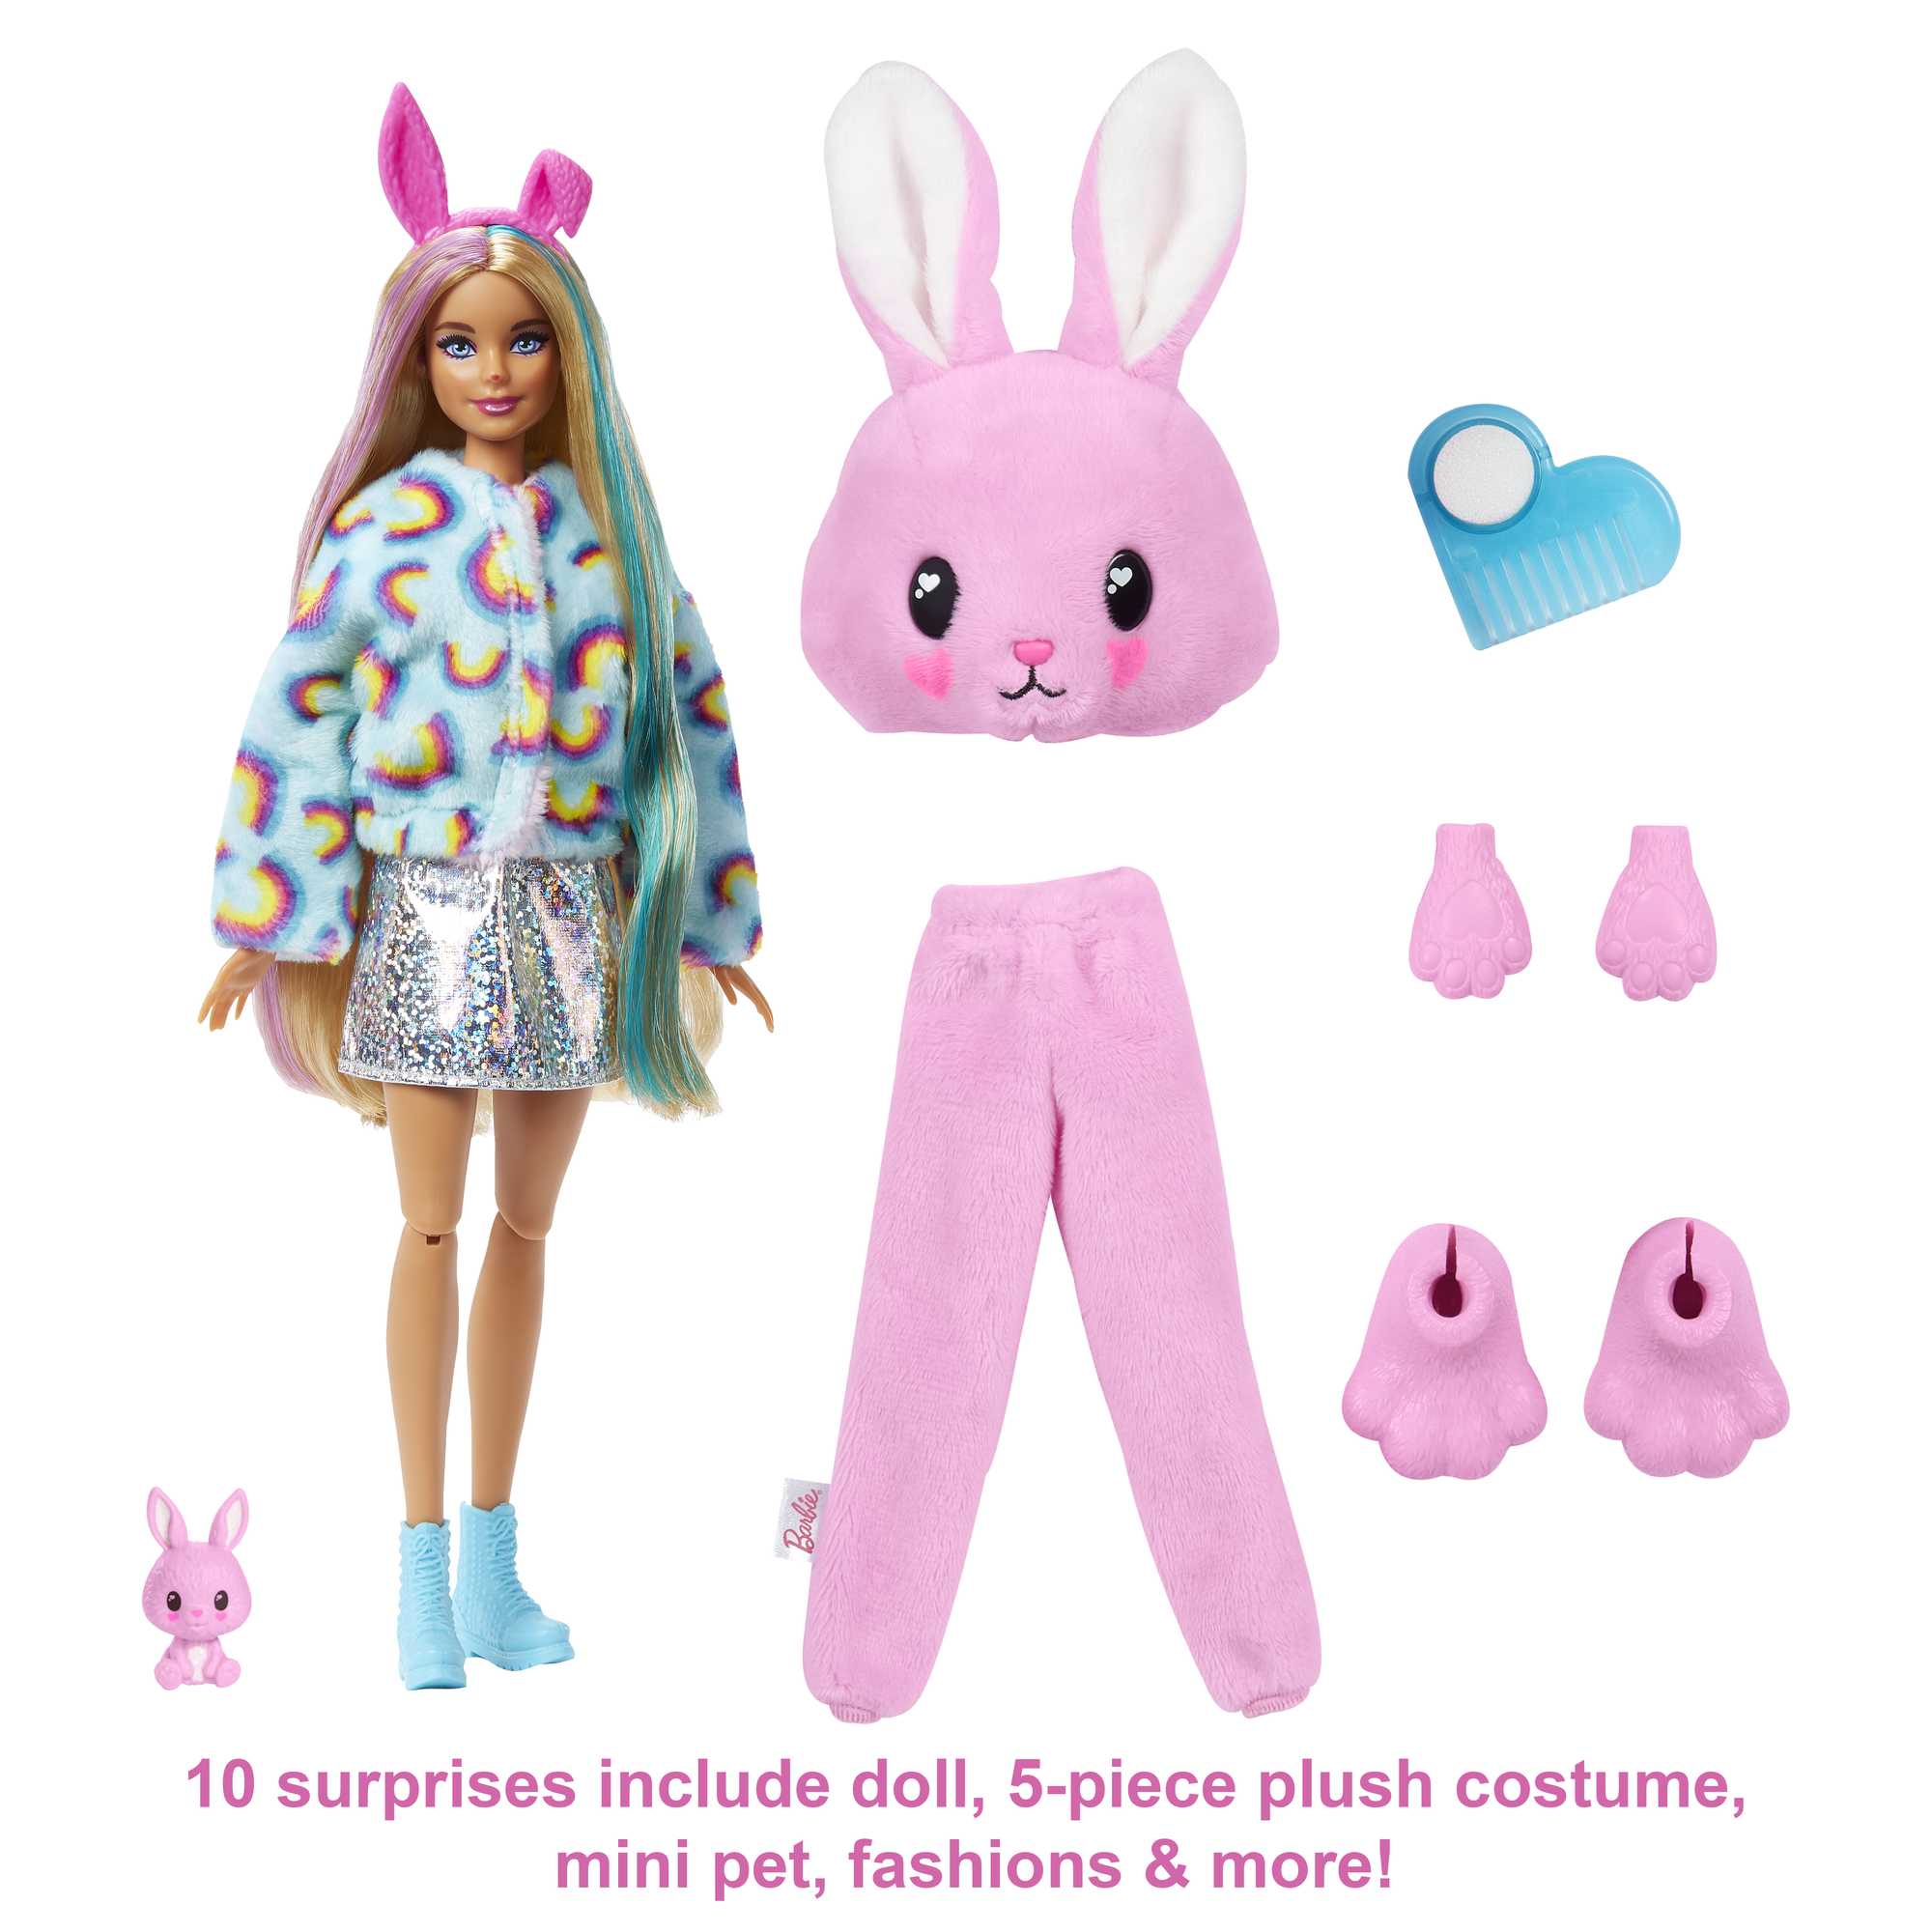  Barbie Cutie Reveal Doll & Accessories, Poodle Plush Costume &  10 Surprises Including Color Change, “Star” Cozy Cute Tees : Everything Else